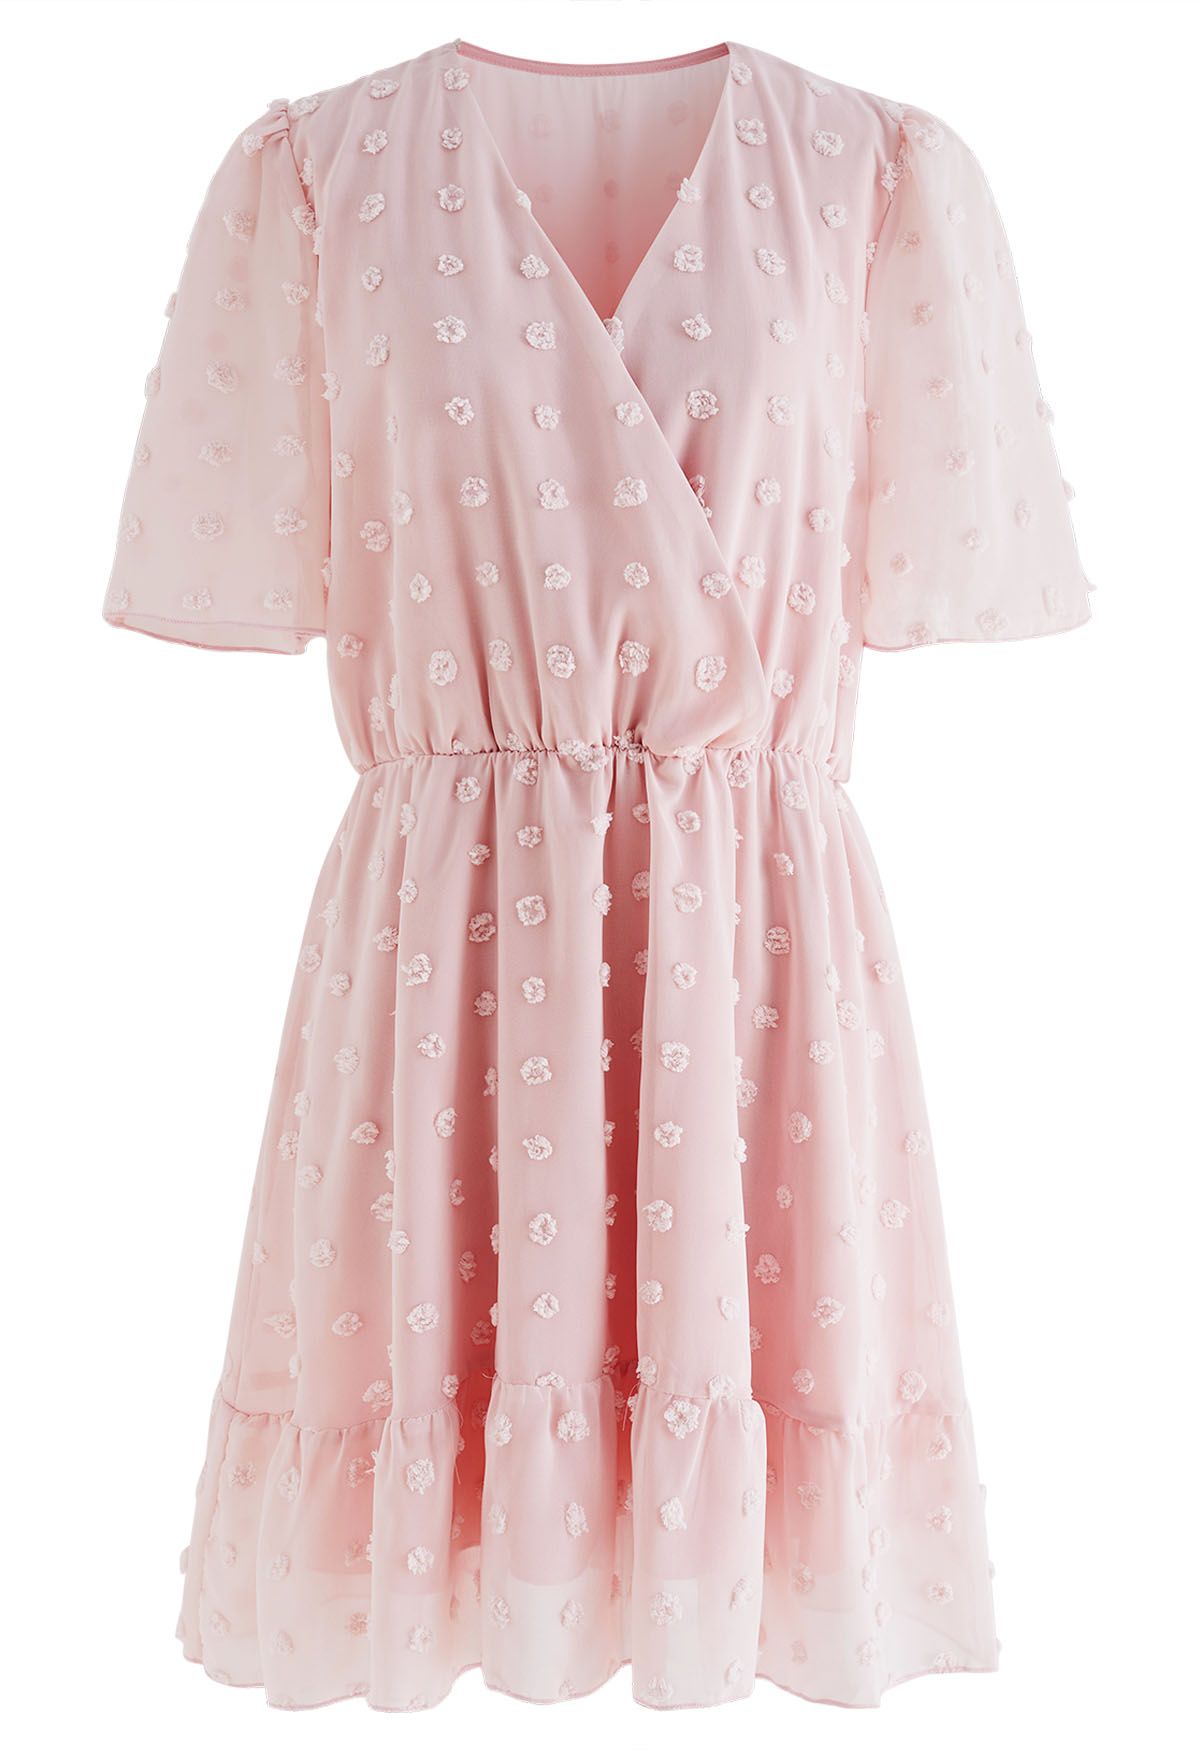 Cotton Candy Soft Mesh Faux Wrap Dress in Pink - Retro, Indie and ...